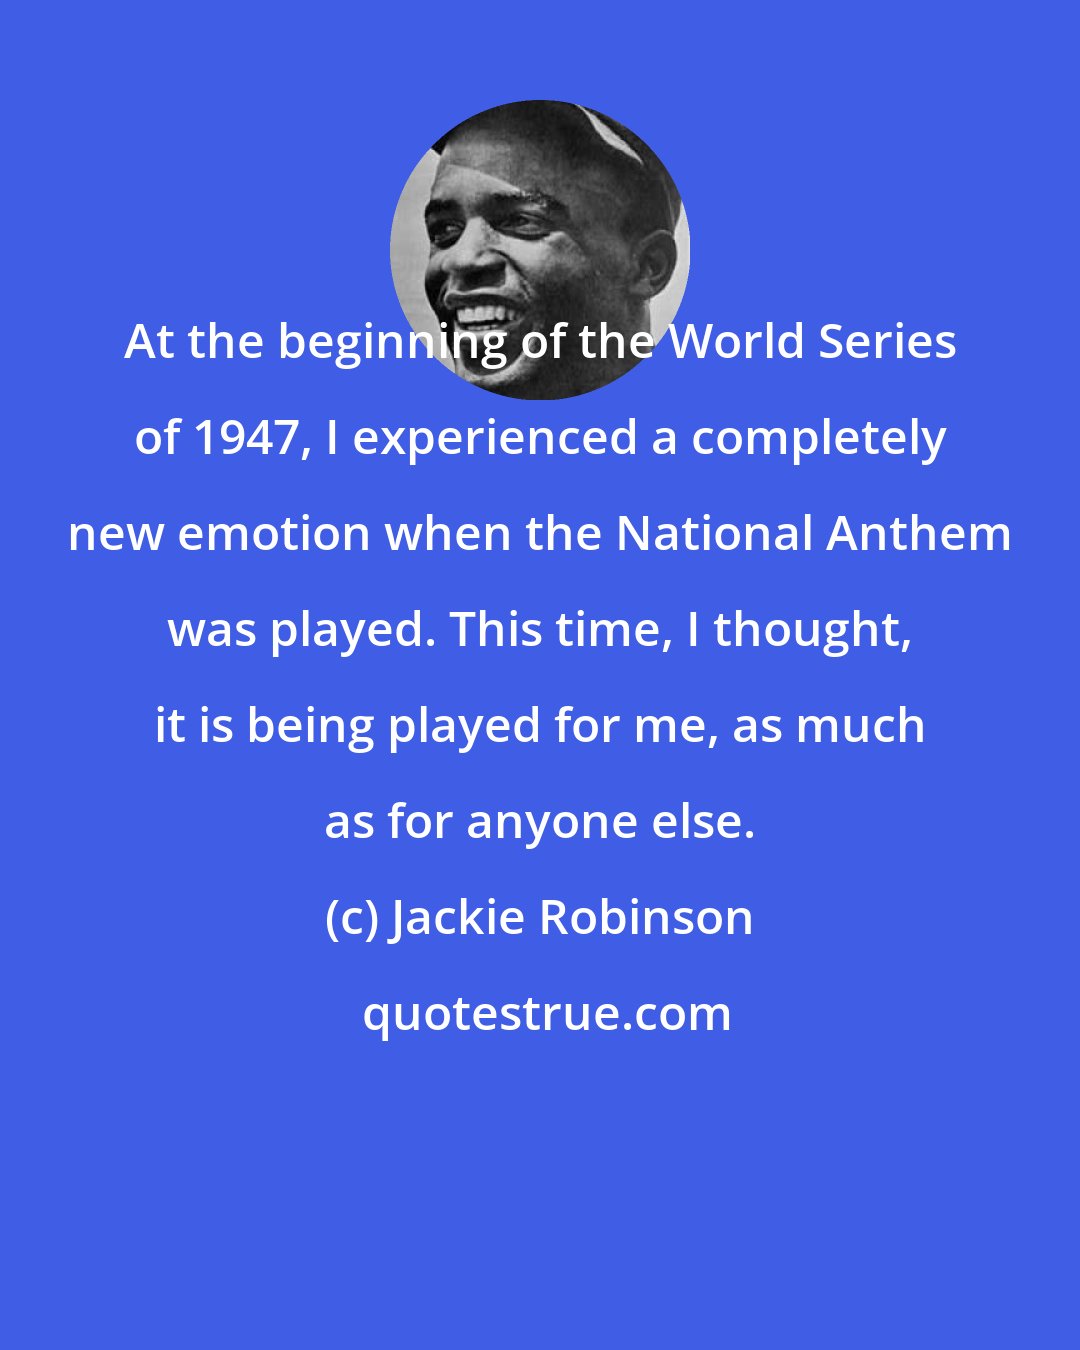 Jackie Robinson: At the beginning of the World Series of 1947, I experienced a completely new emotion when the National Anthem was played. This time, I thought, it is being played for me, as much as for anyone else.